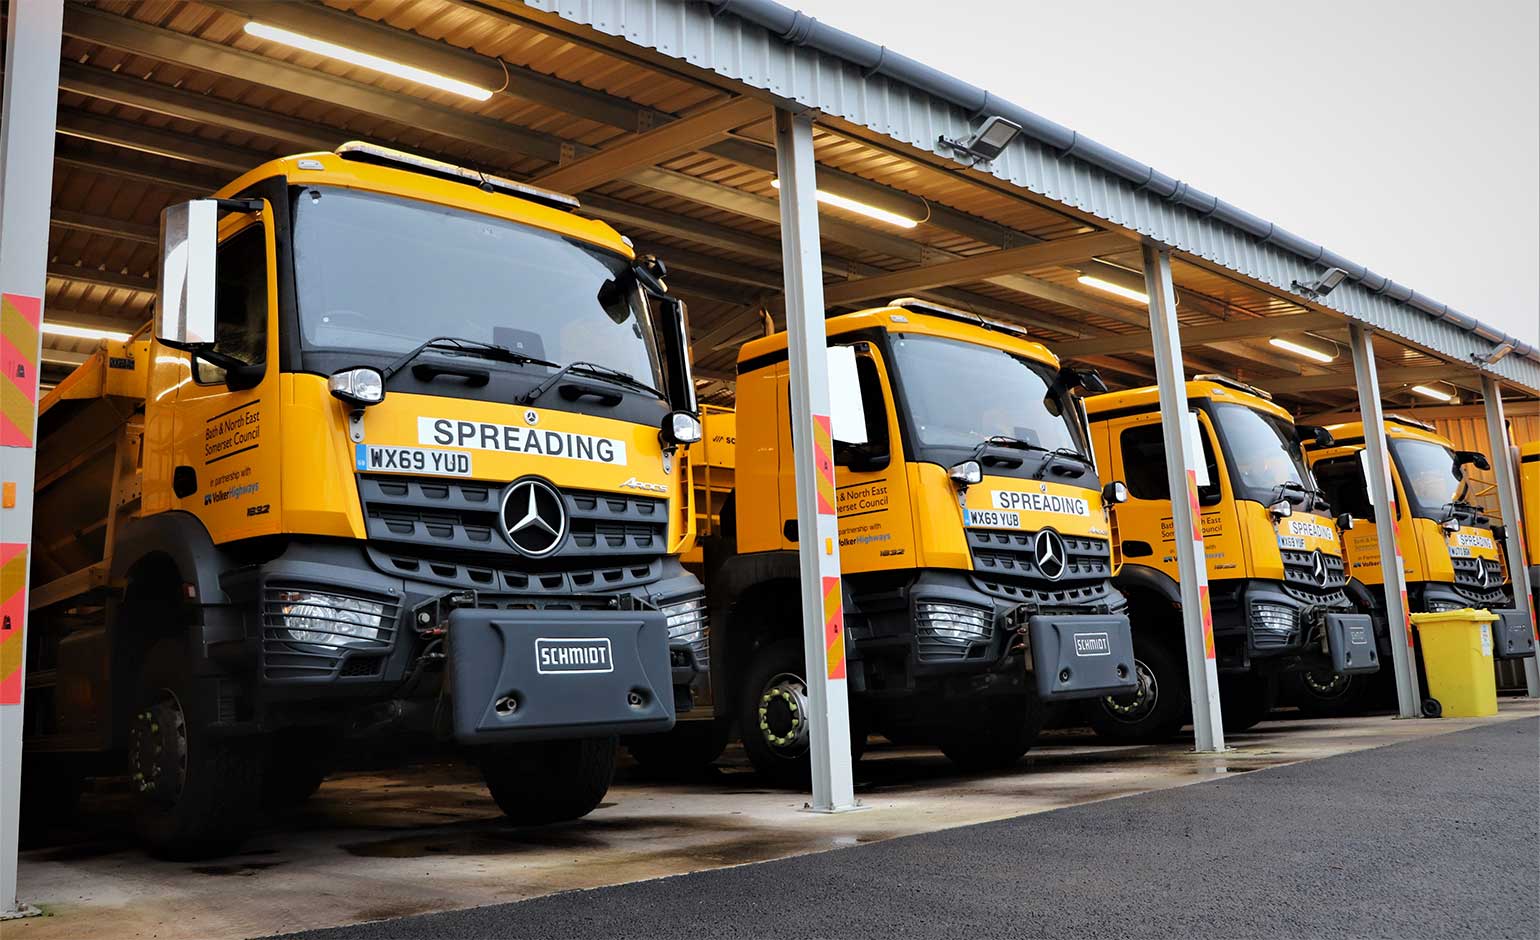 Cold weather sees gritting teams head out across the district